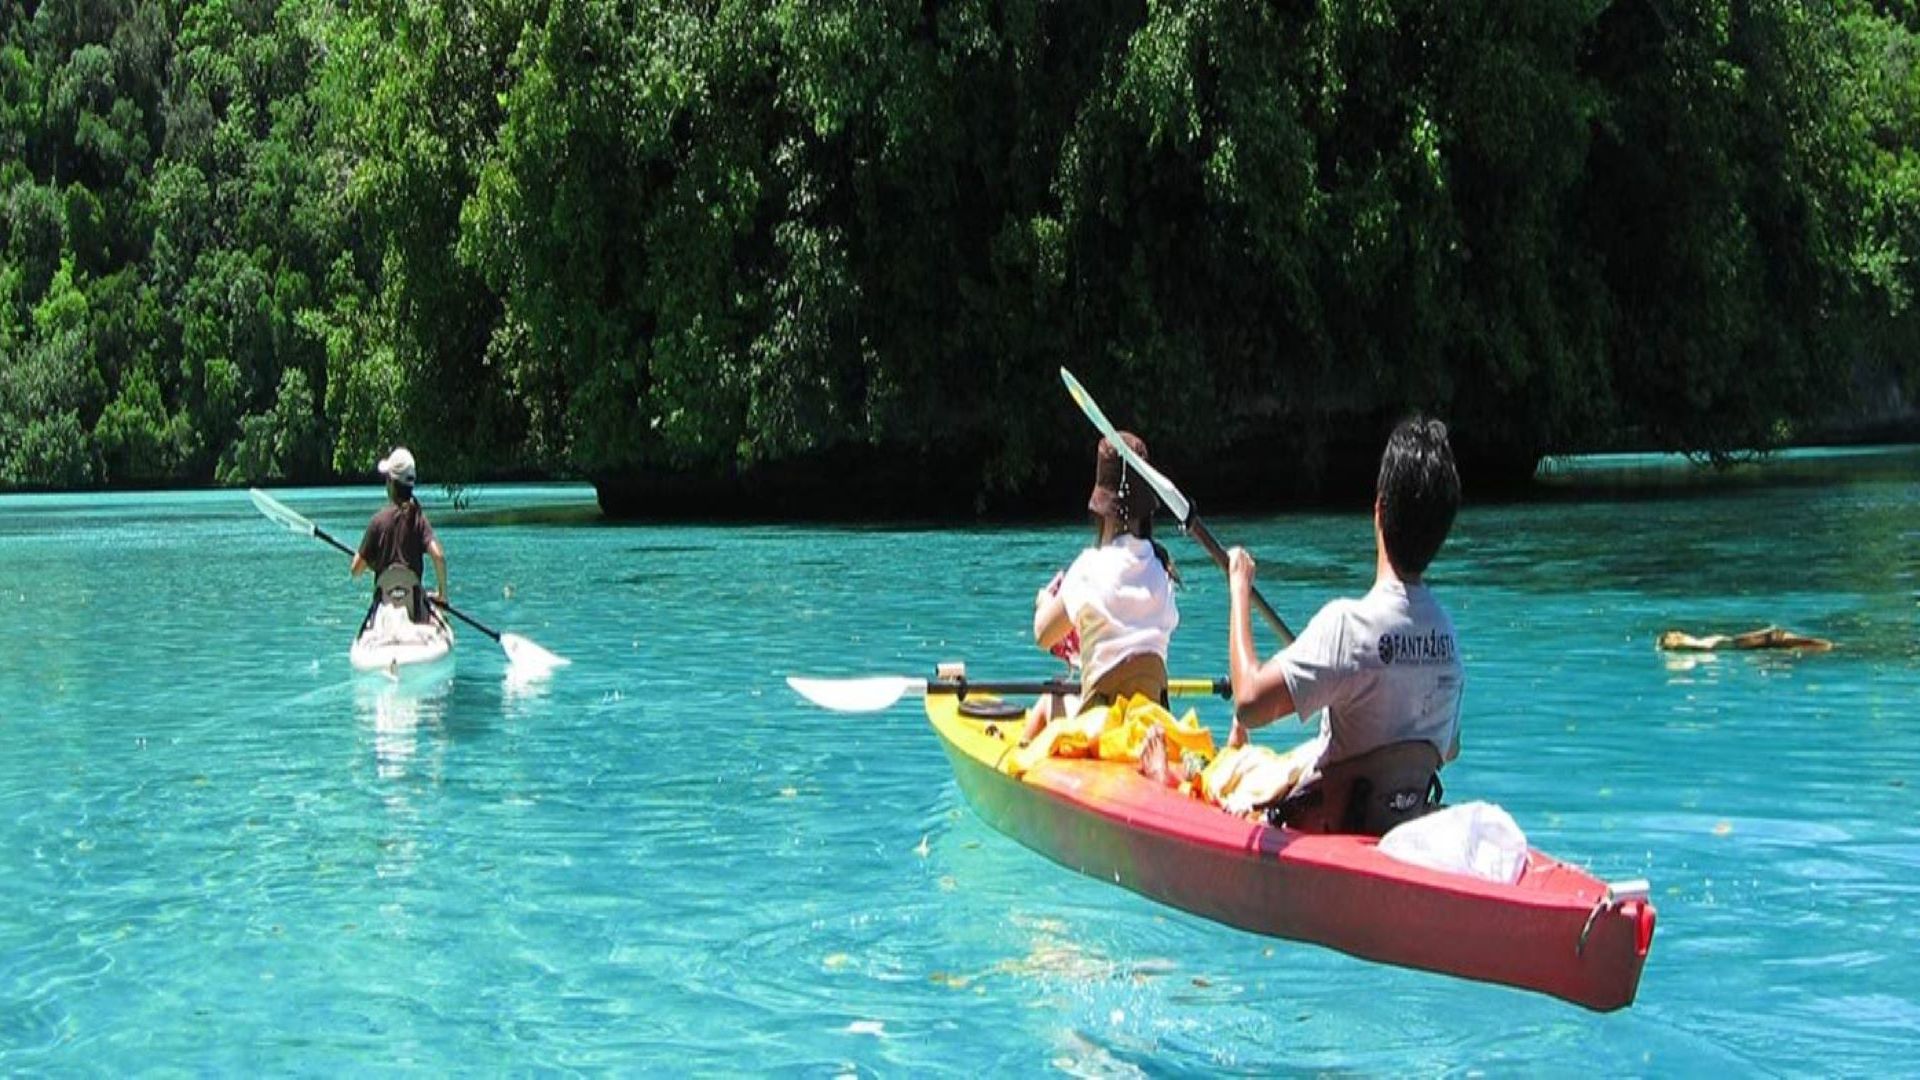 A Group Of People Riding On The Back Of A Boat In The Water